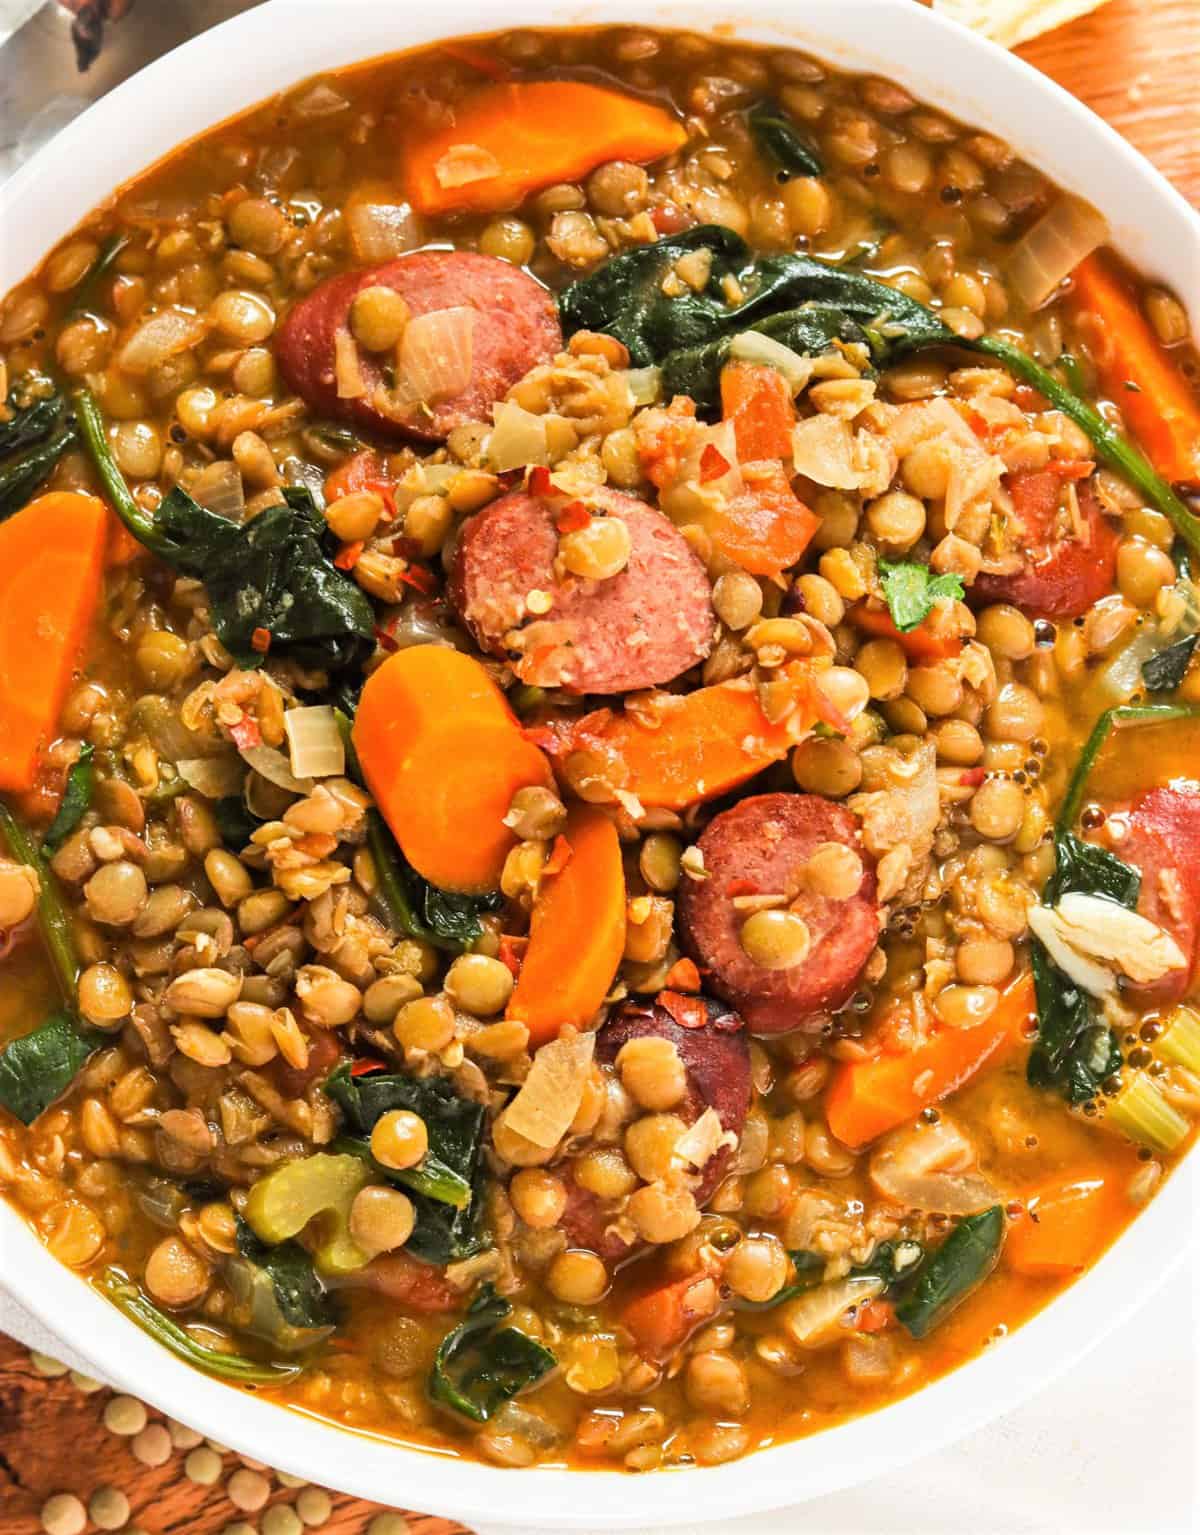 Your family will love sausage lentil soup